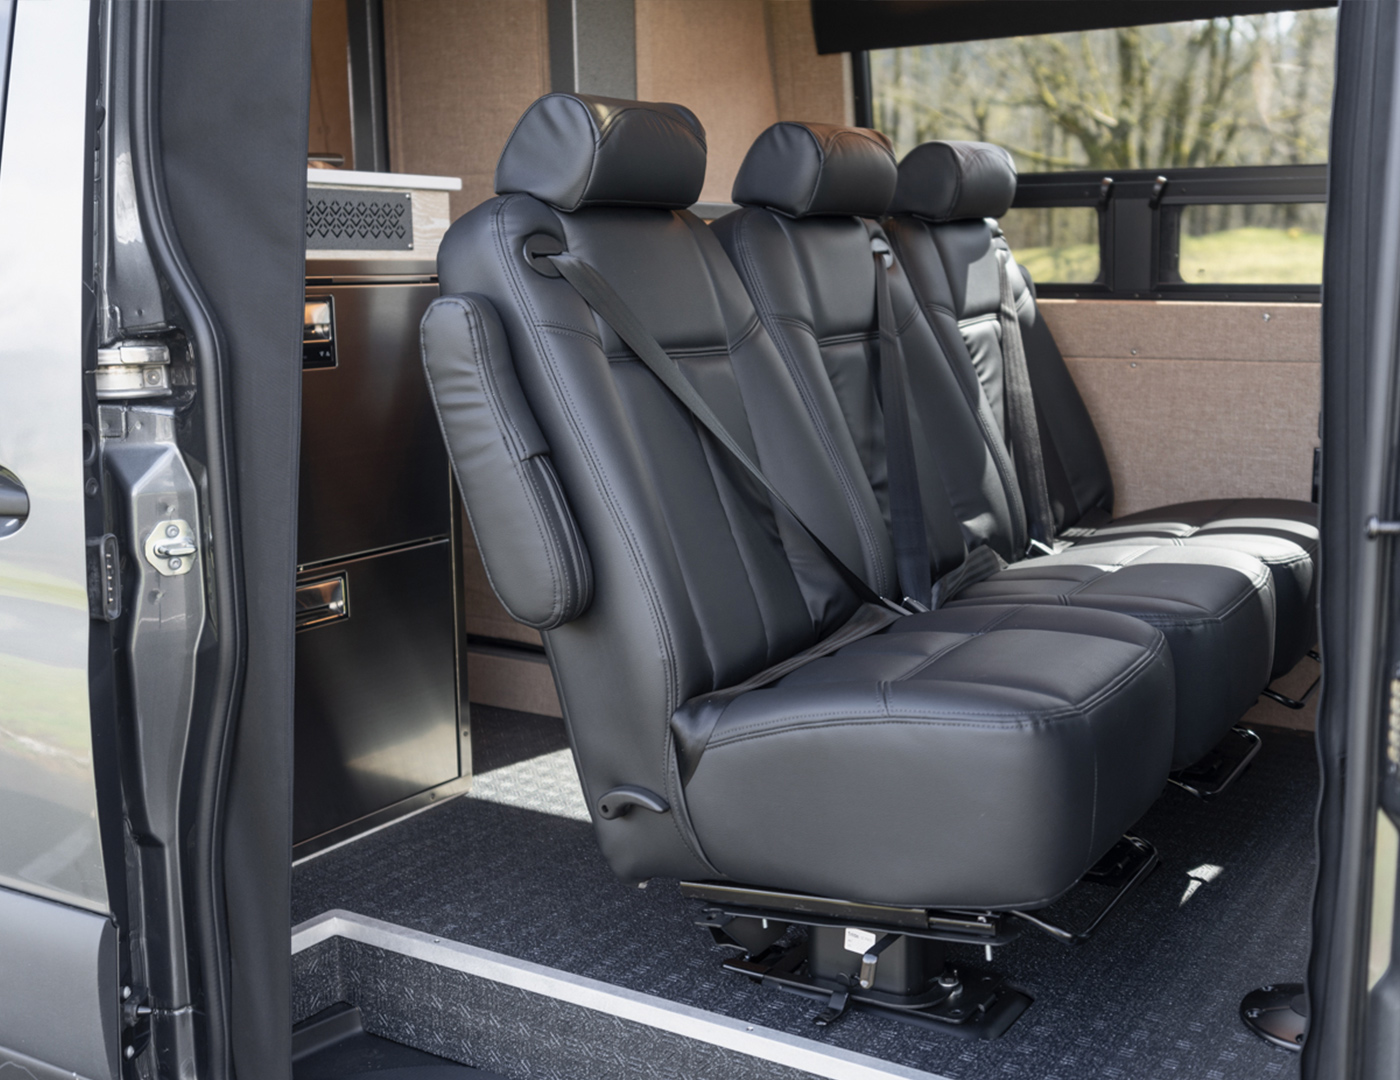 Custom converted mercedes sprinter by outside van with black floor, seating for five, and refrigerator